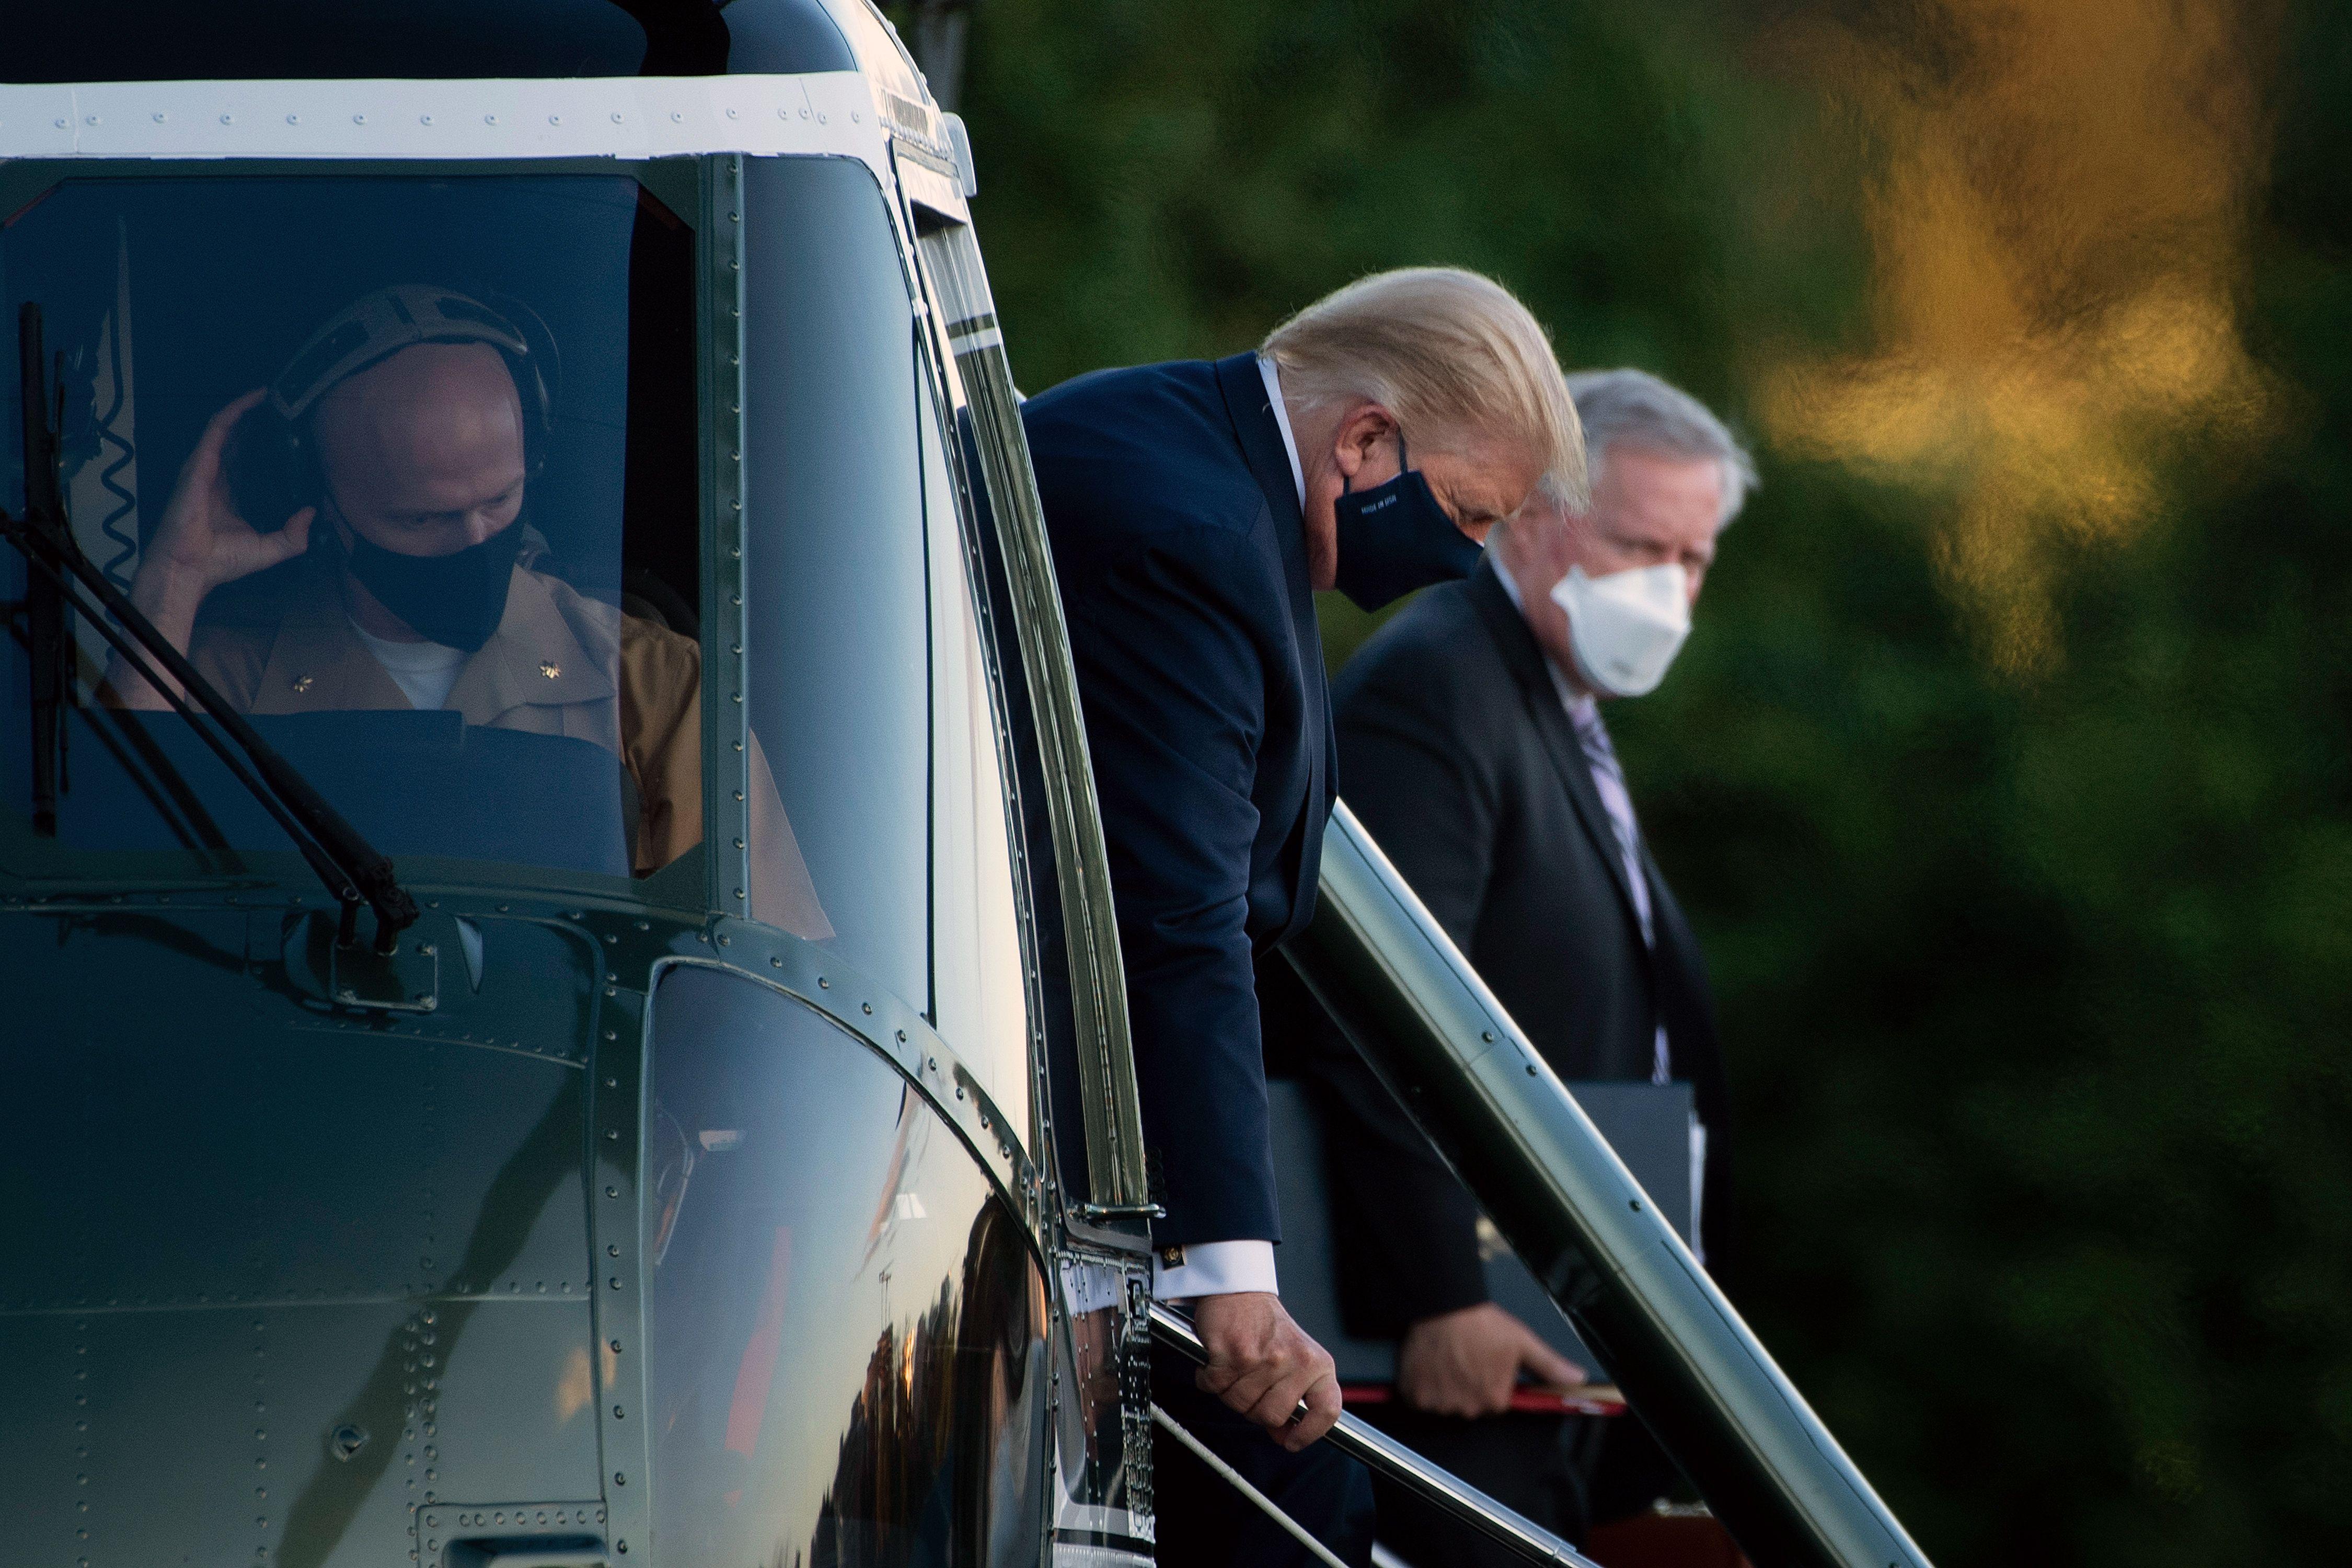 Trump and Mark Meadows, both wearing masks, step off a helicopter.